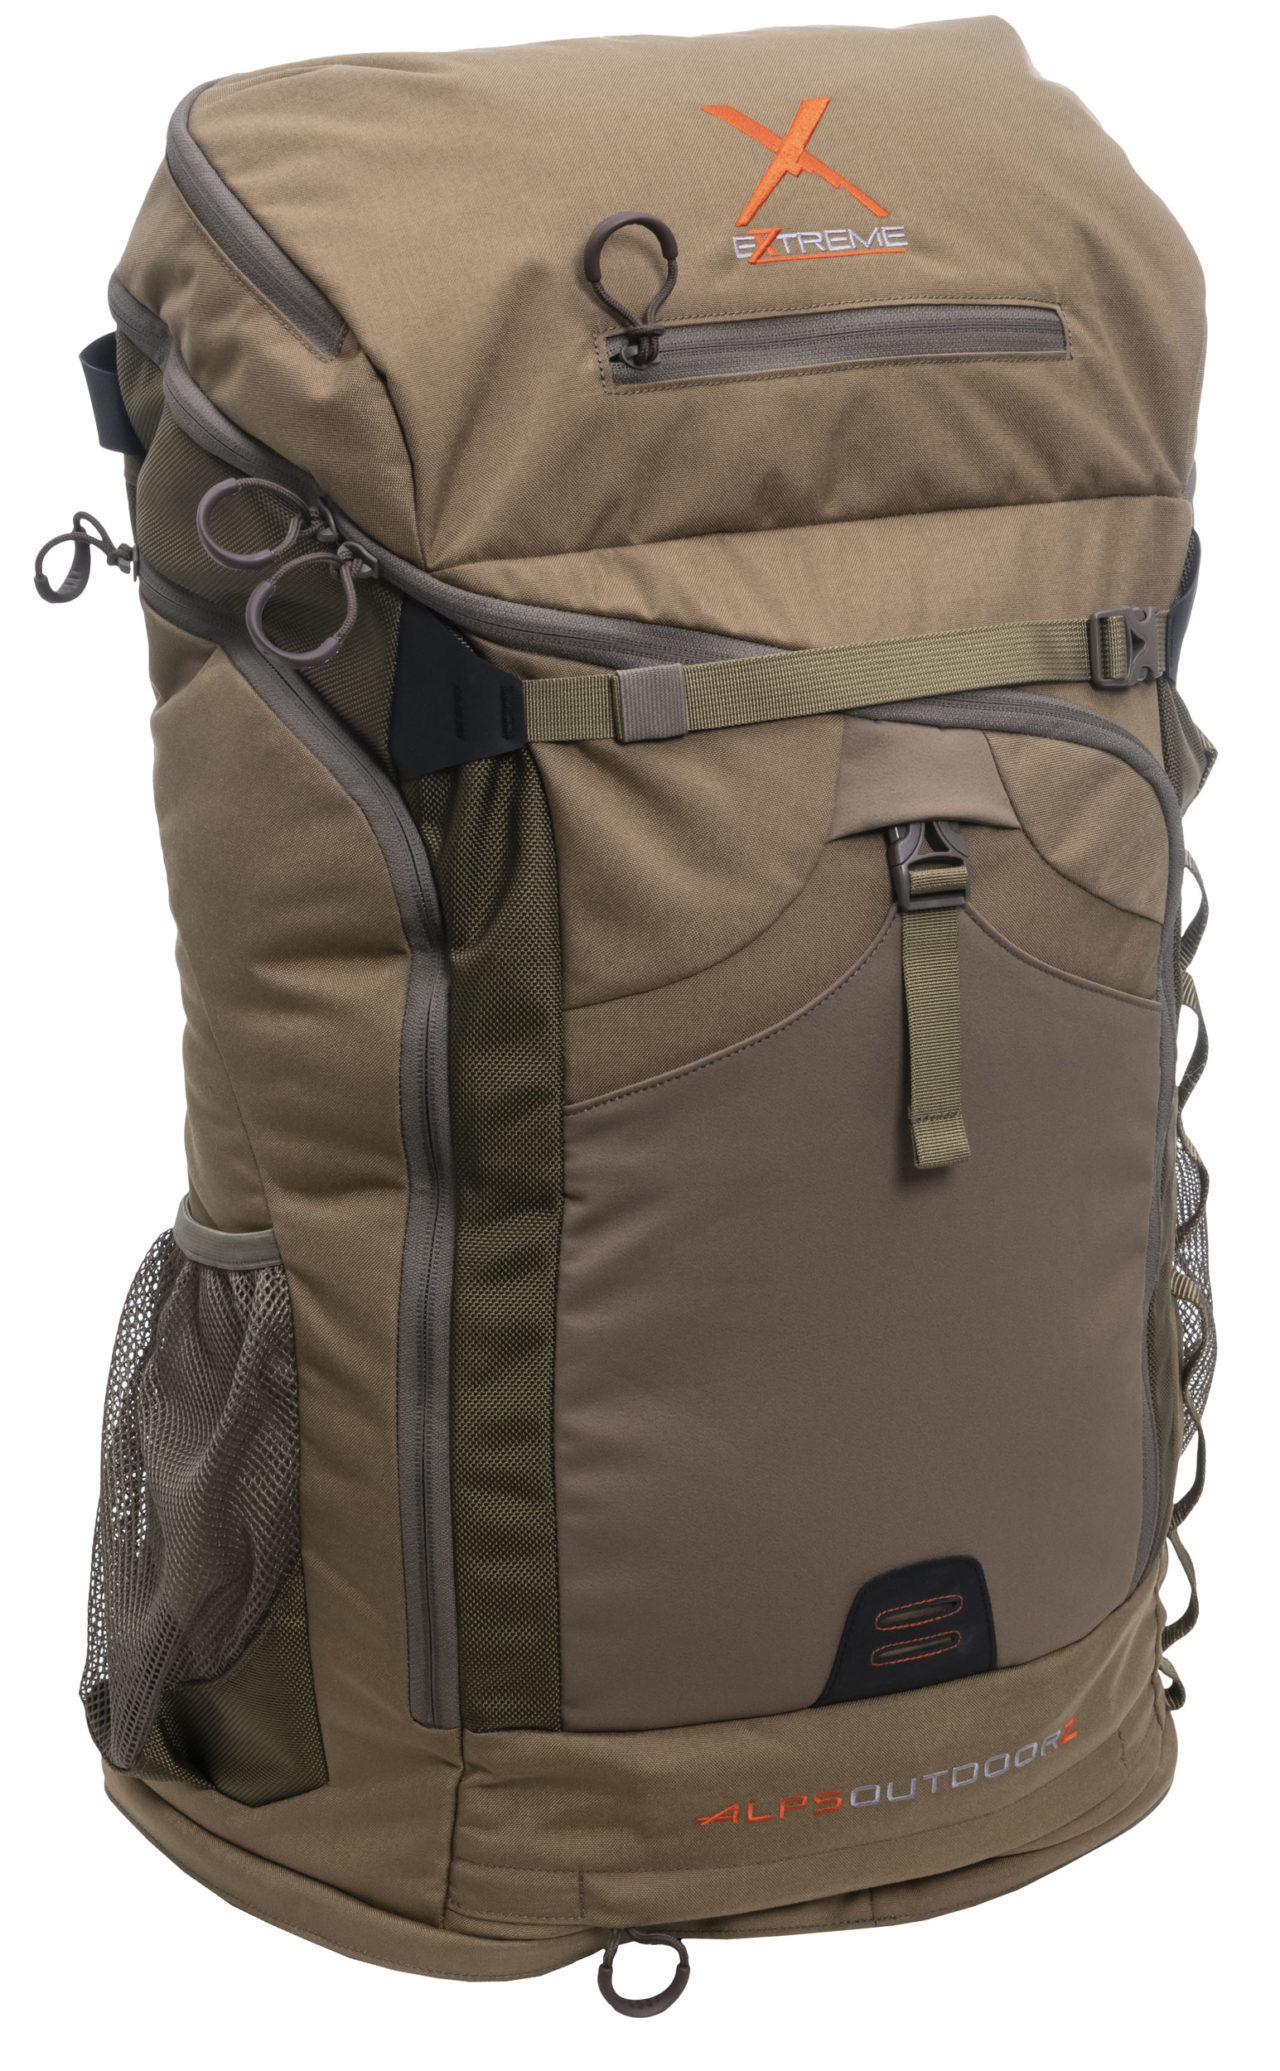 ALPS OutdoorZ Trophy X Pack Bag Now Available